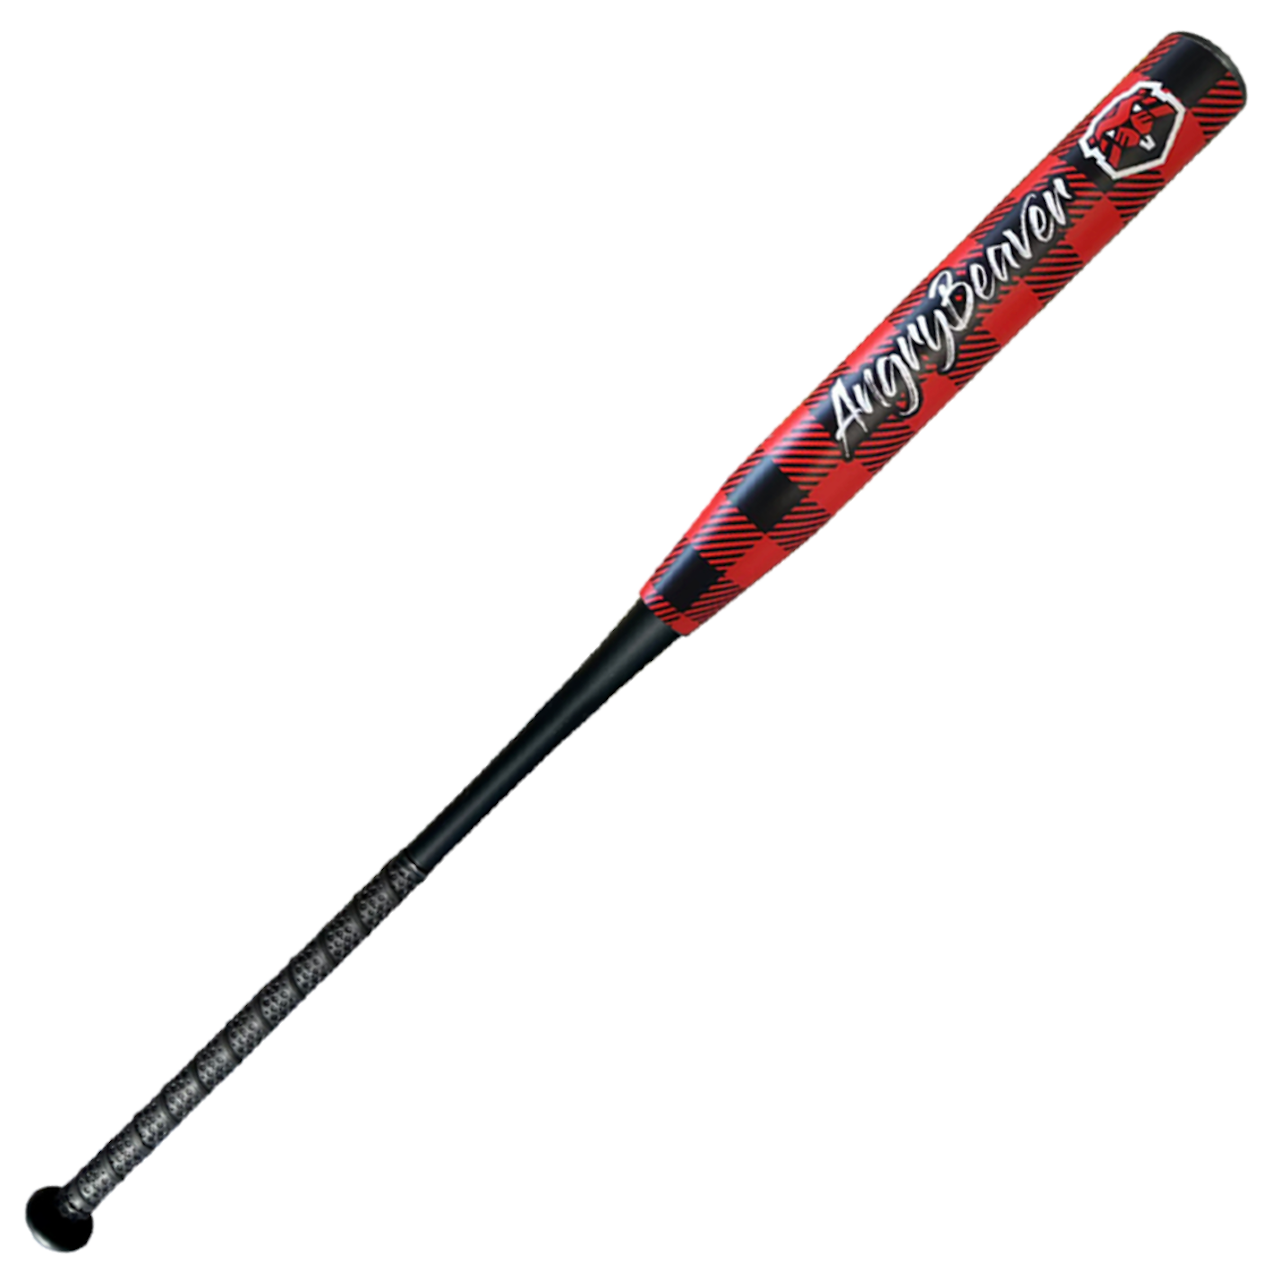 USSSA 240 Compression Approved Slowpitch Softball Bats – Page 2